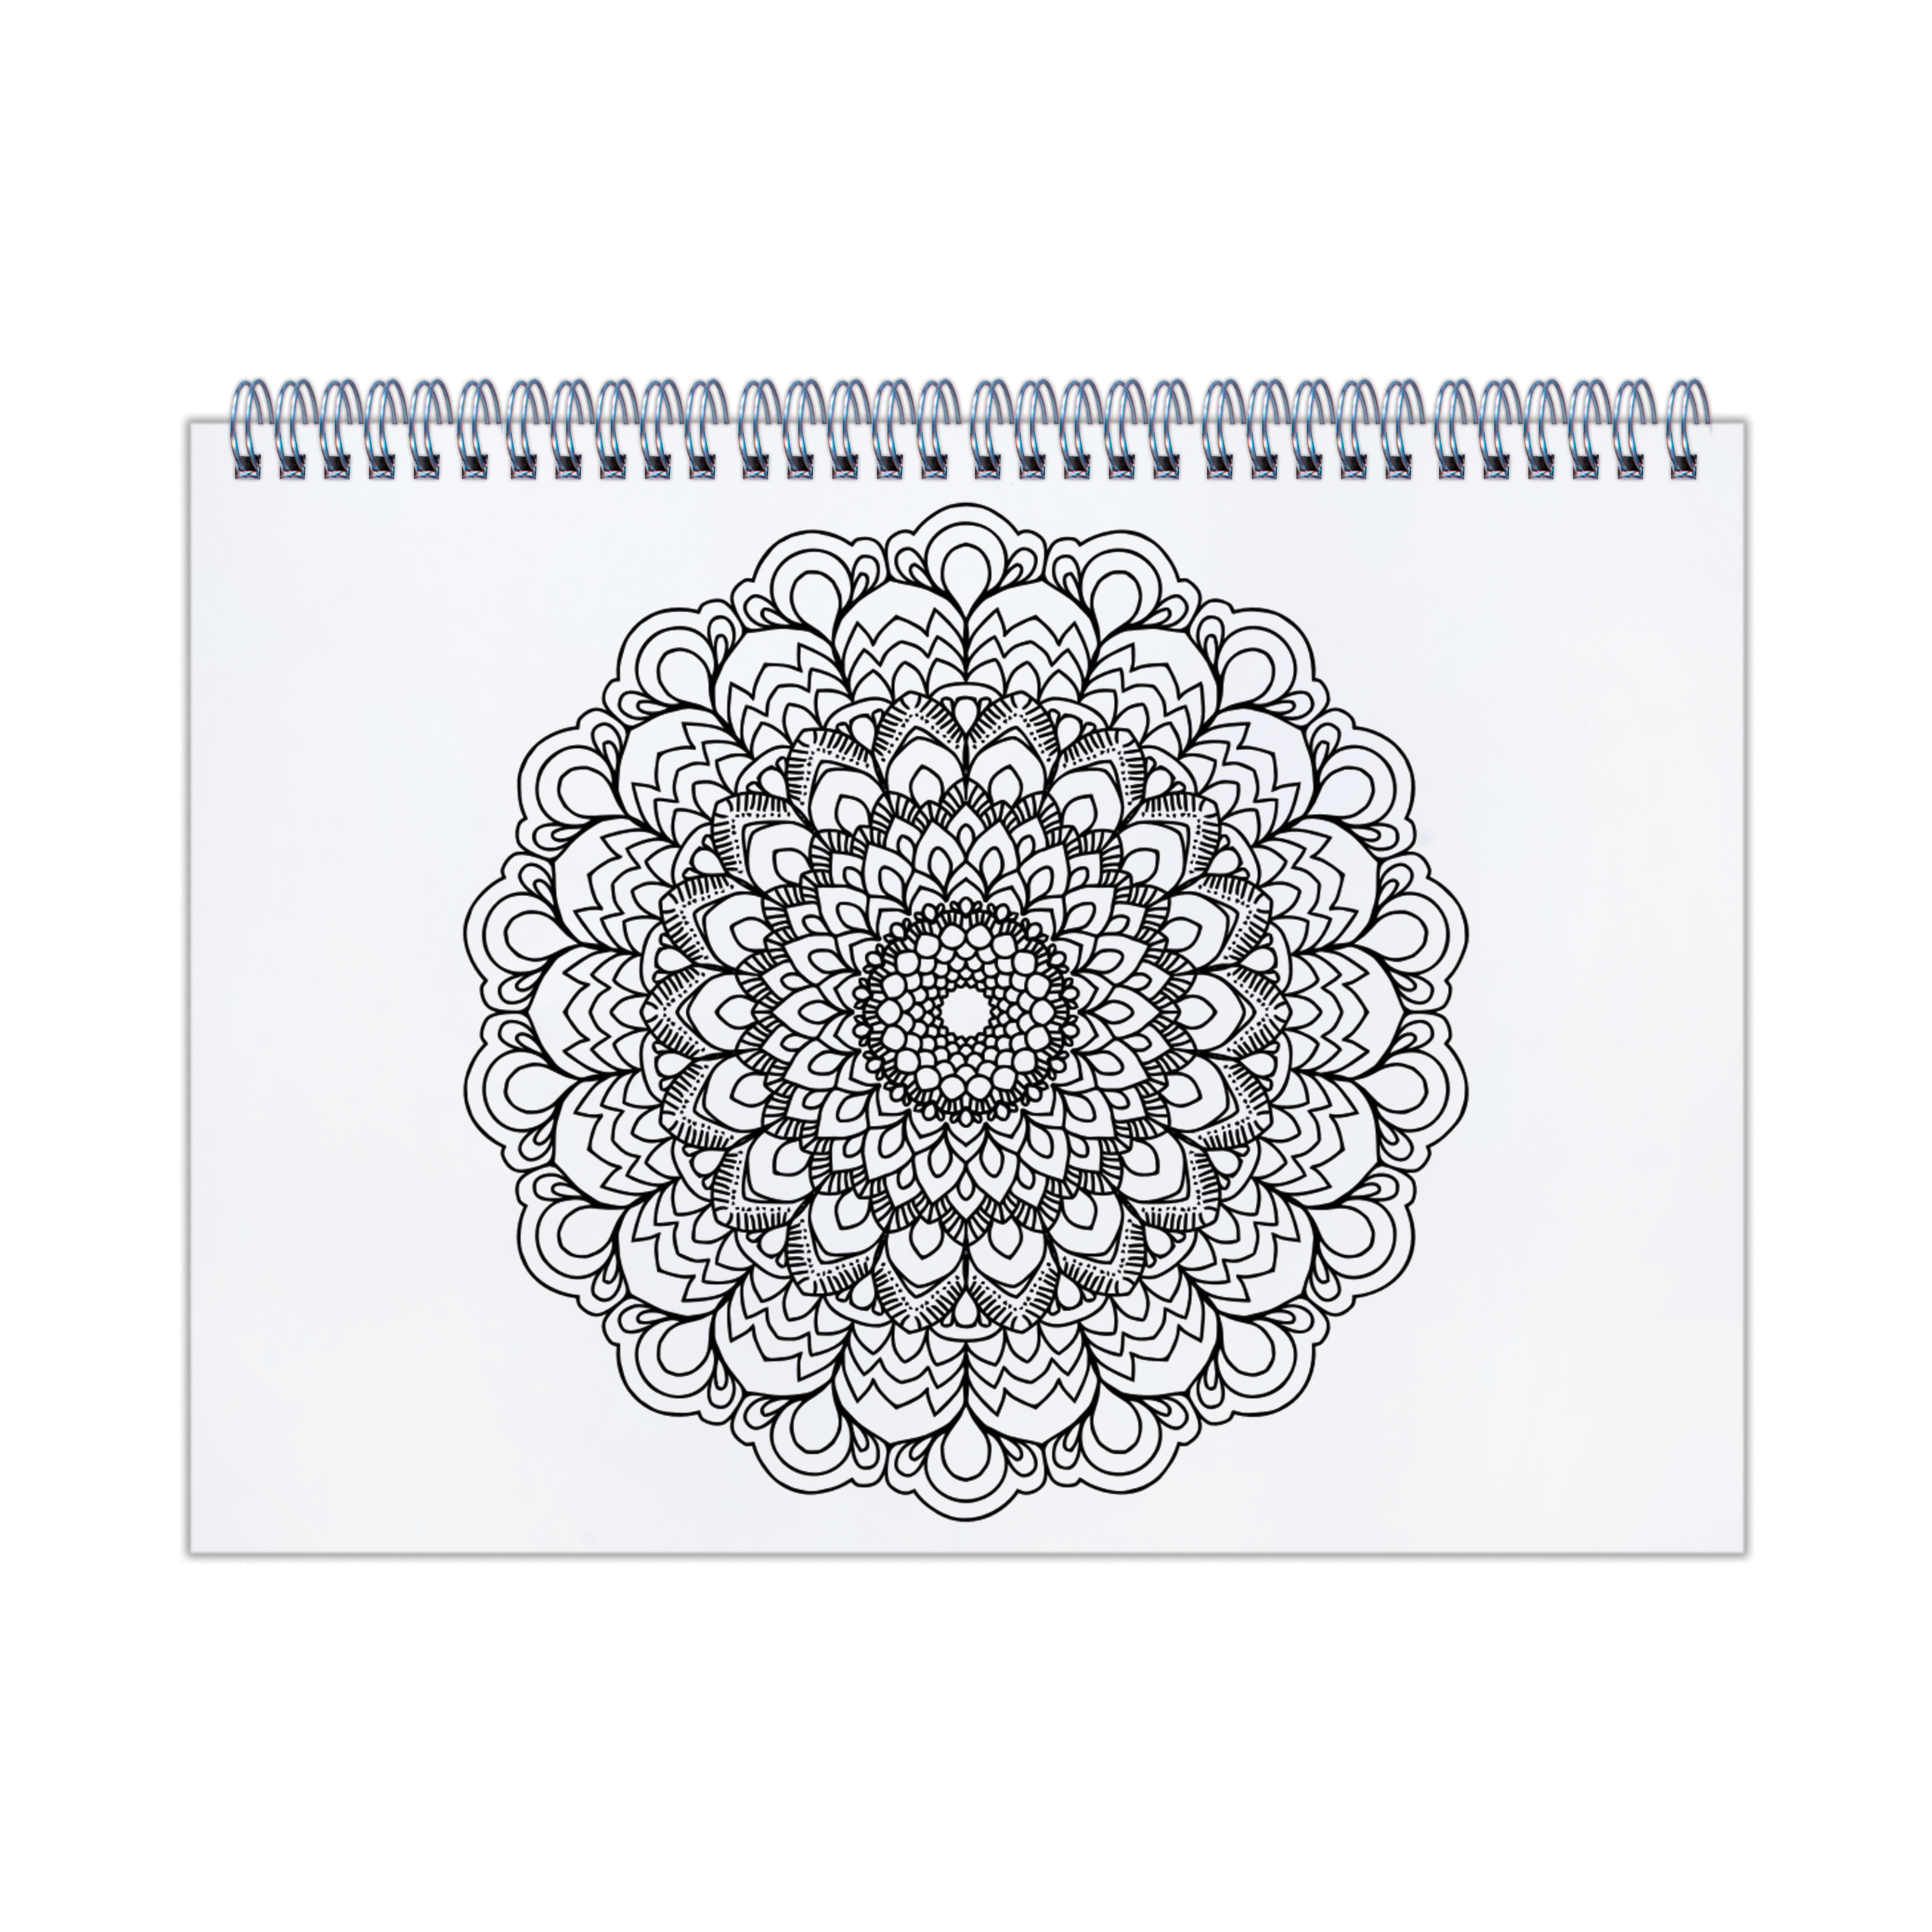 Mystic Mandalas Sketchbook Spiral Bound Two Printed Sheets In Side Artist Paper A4 115gsm 25Sheets 1 Book